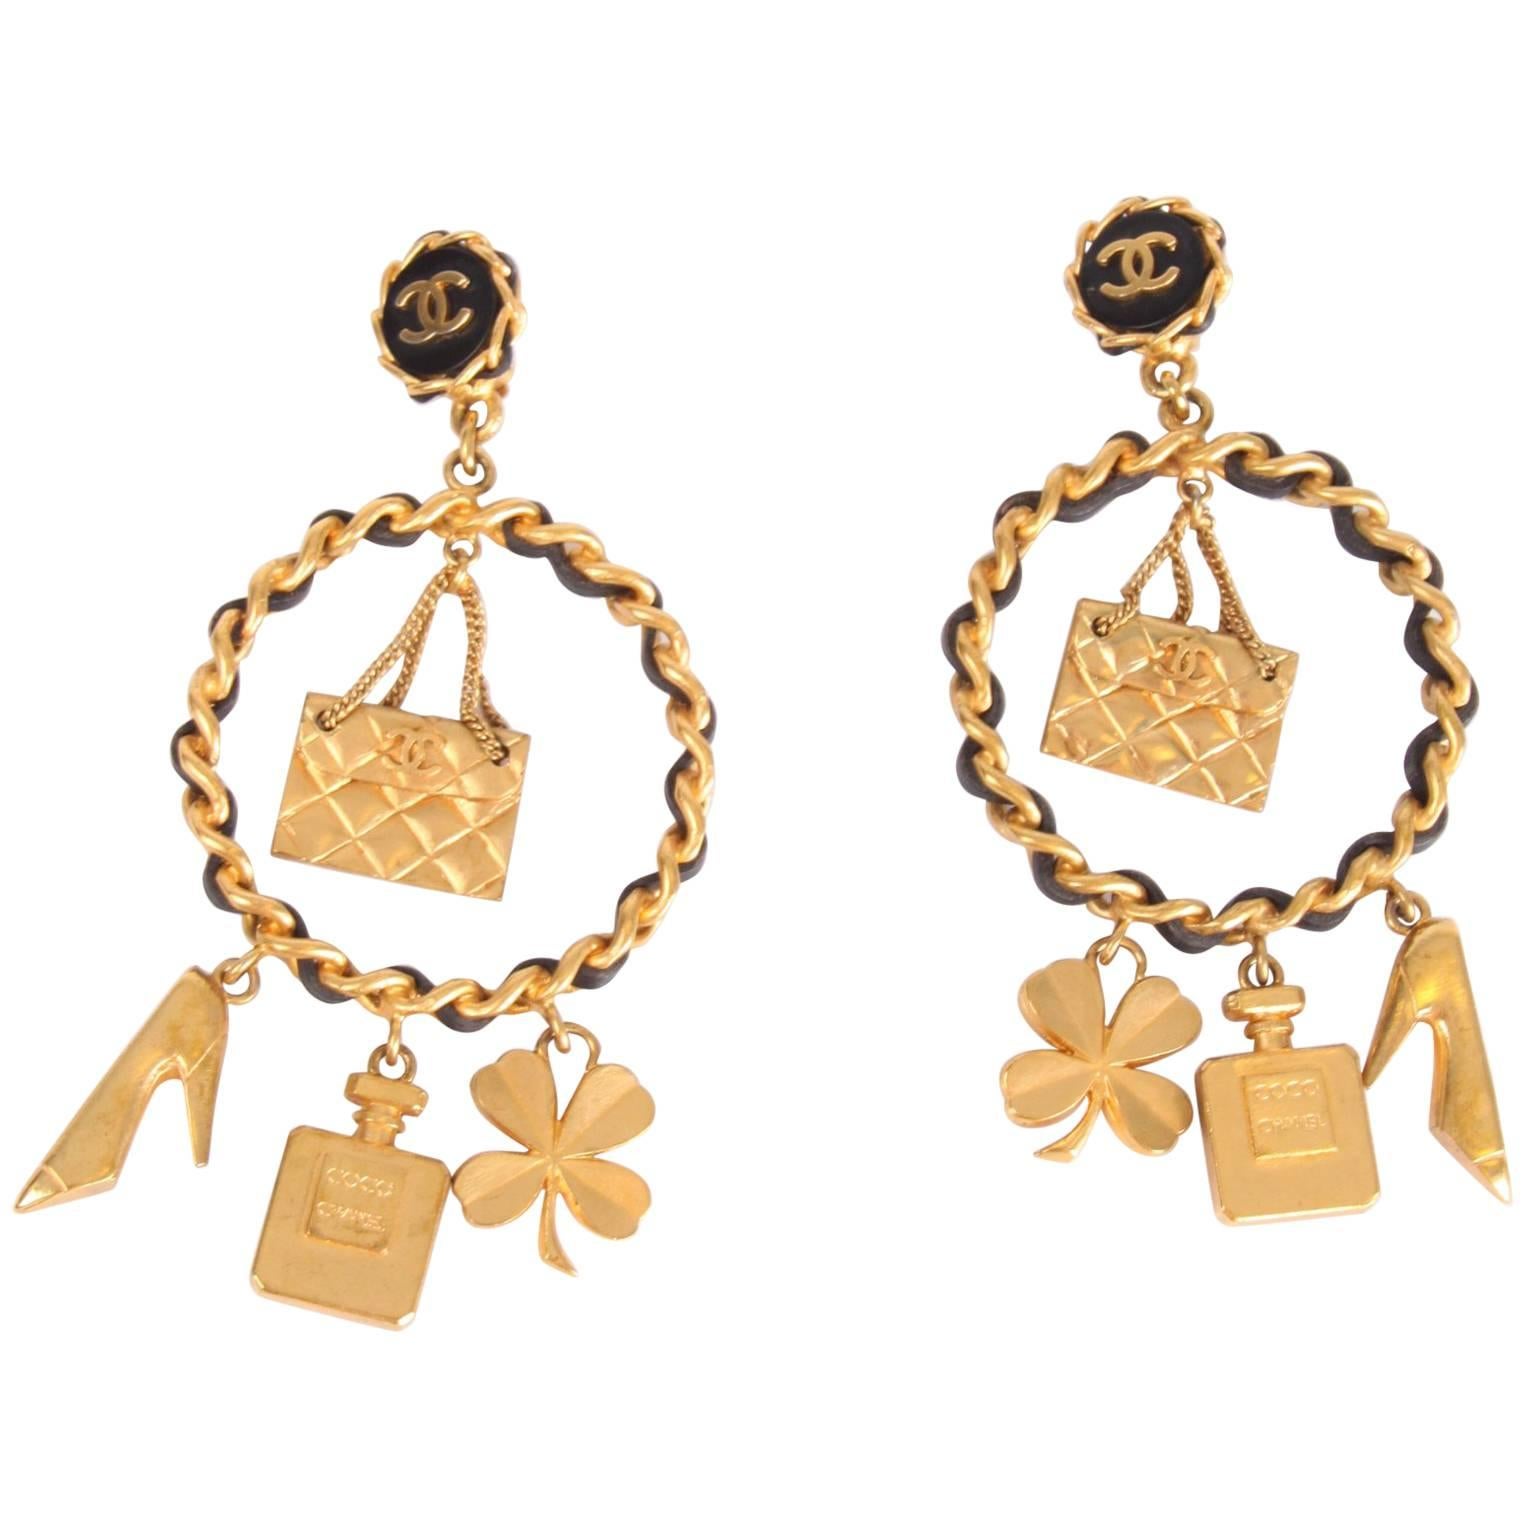 Chanel Iconic Charms Chain Earrings Vintage - gold 1994